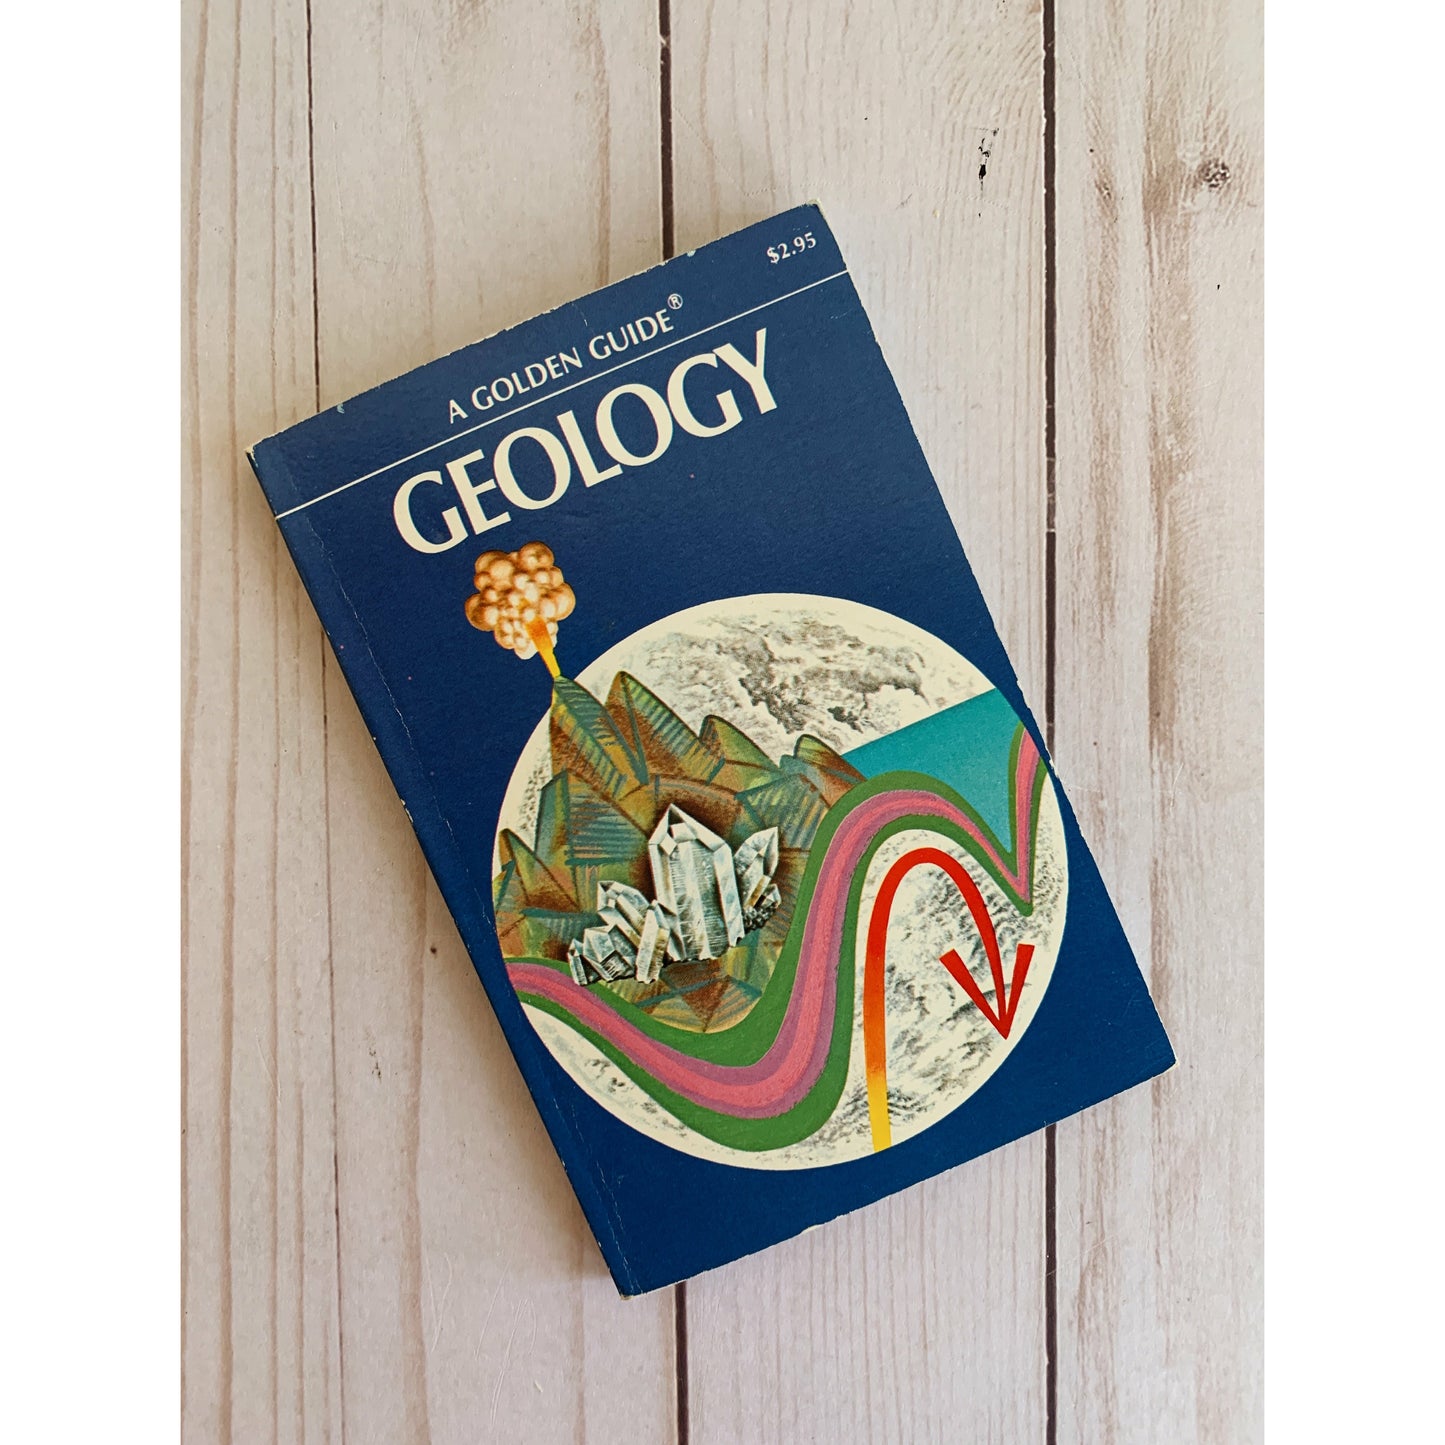 Geology A Golden Guide Paperback 1972